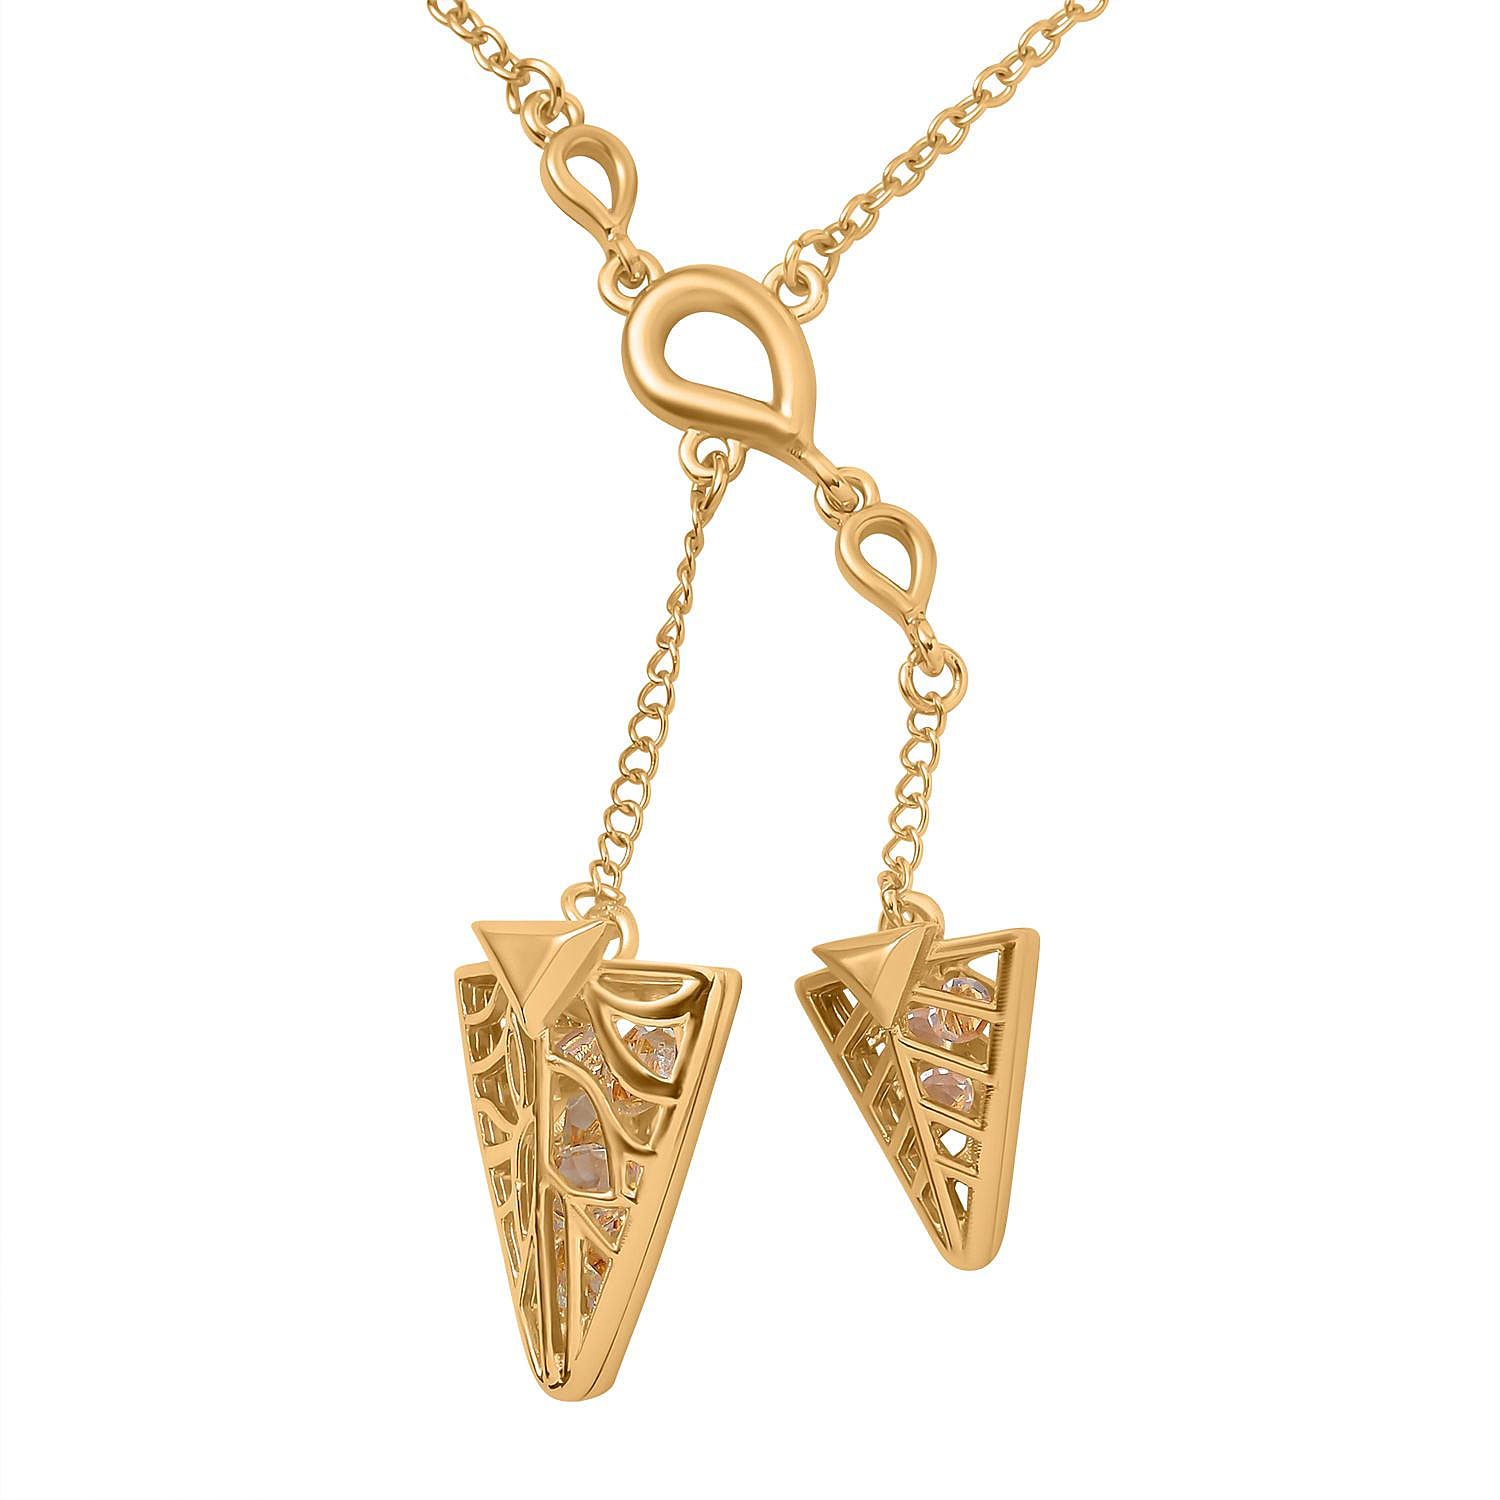 White Austrian Crystal Triangle Necklace (Size - 24)